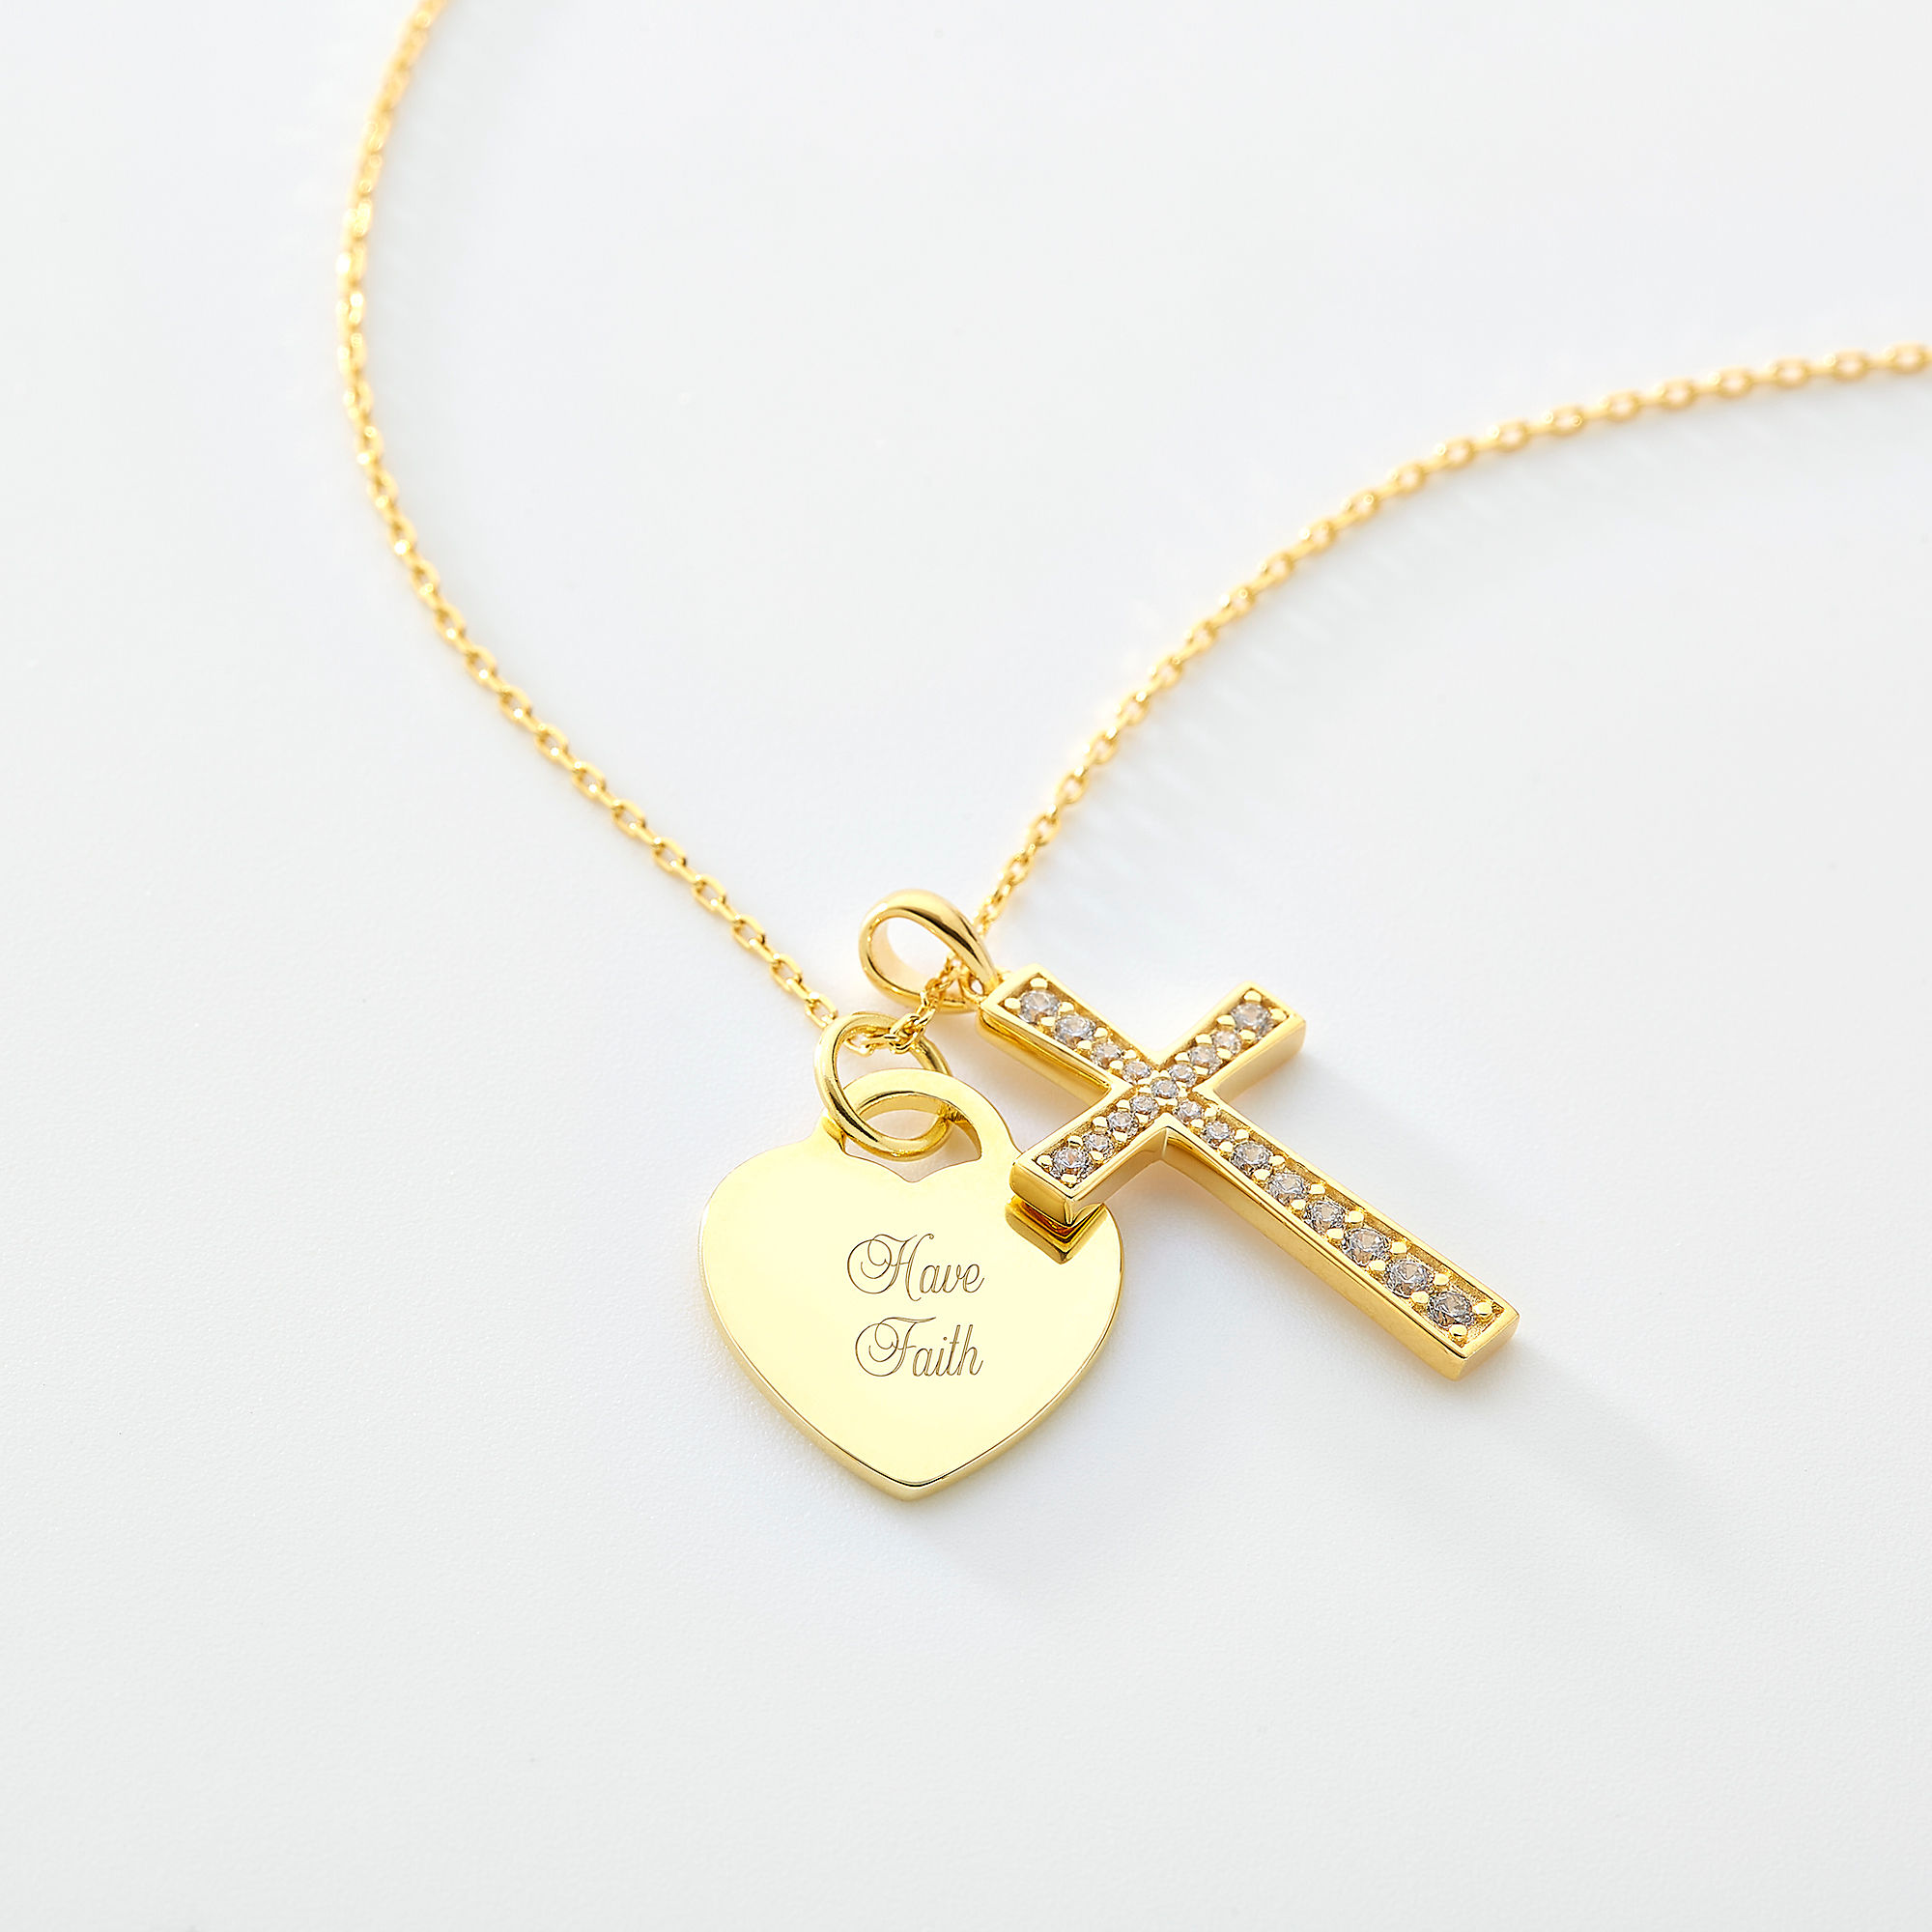 AFFY 14k Gold Over Sterling Silver Cross Pendant Necklace 